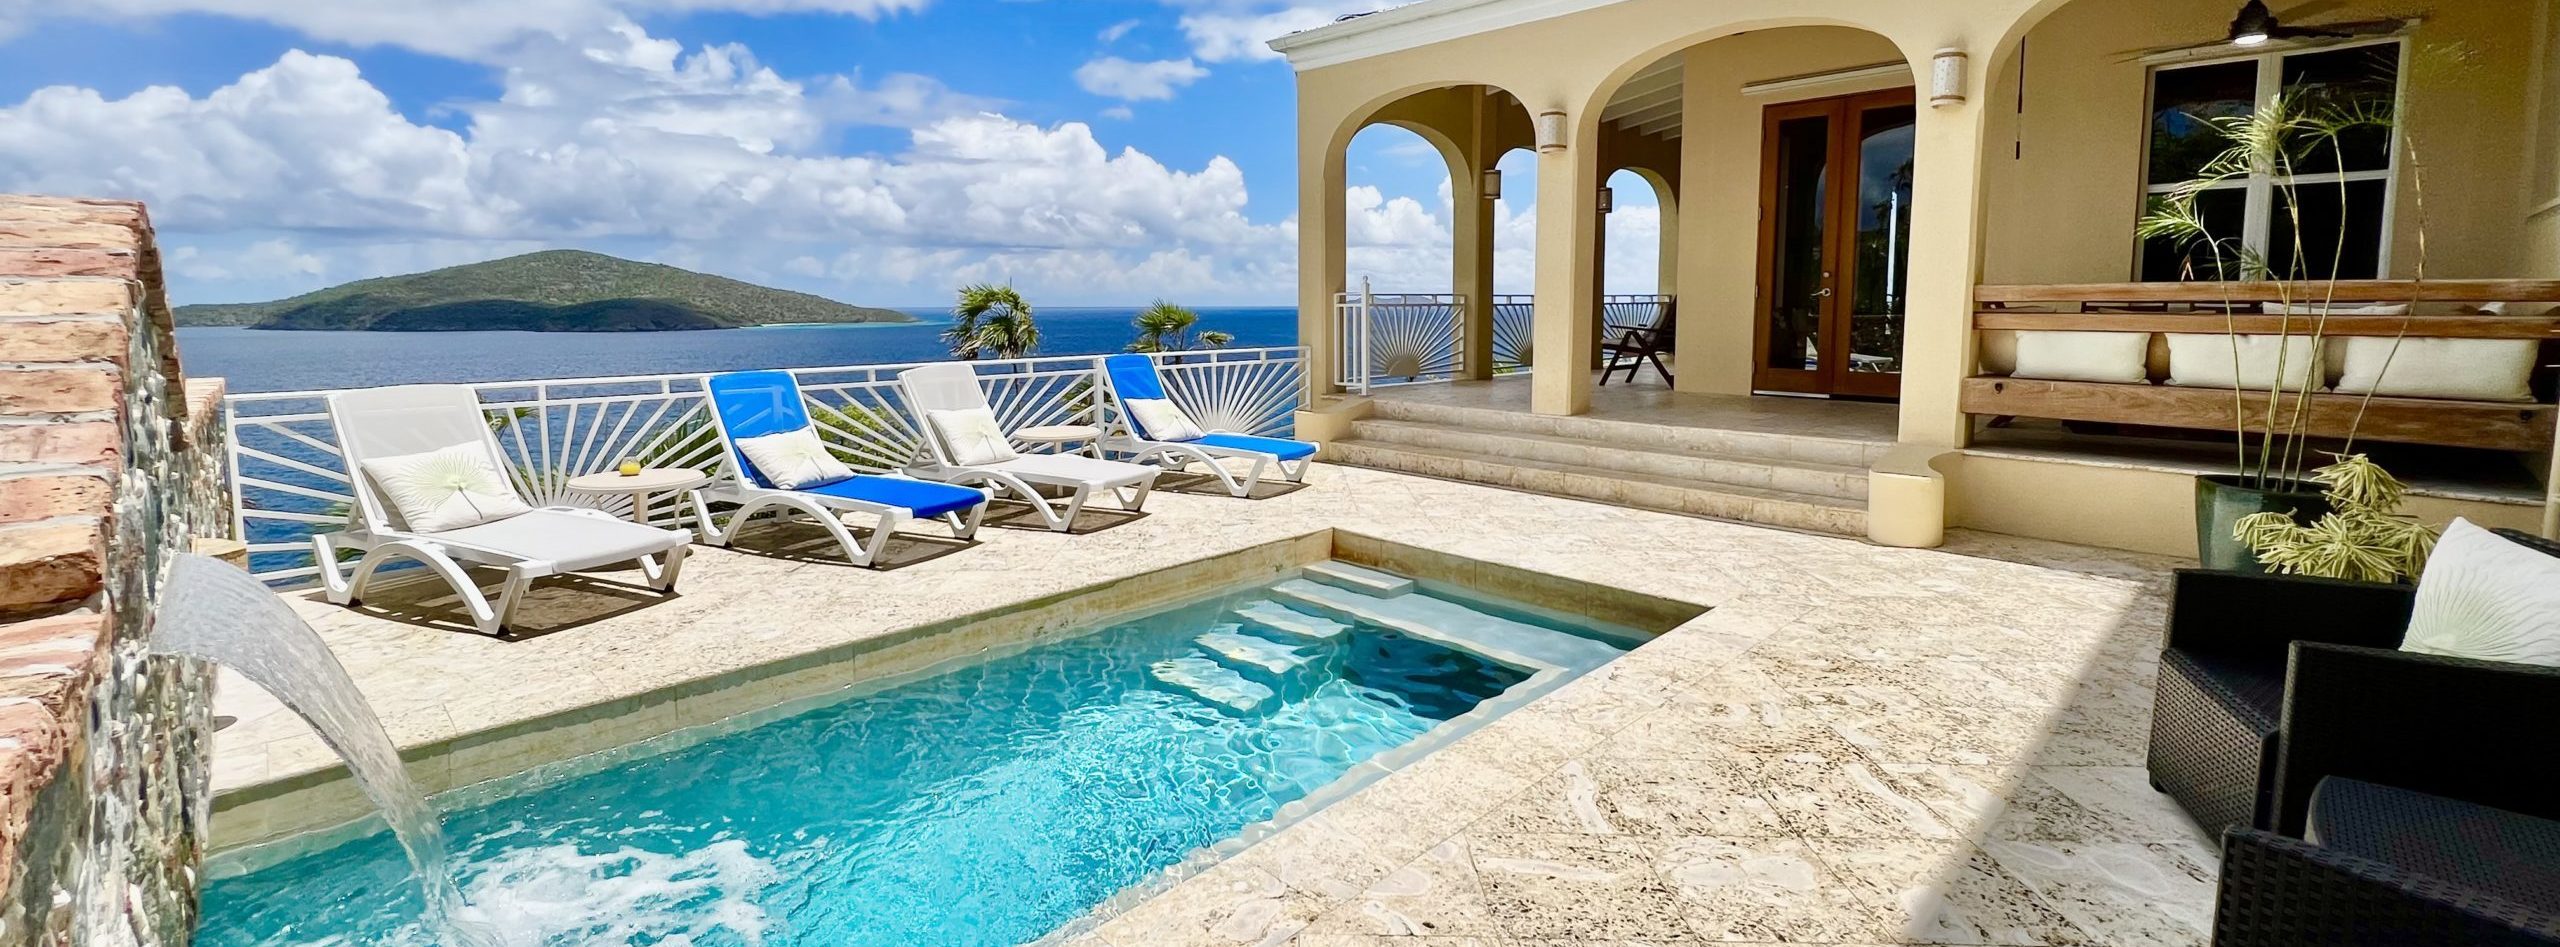 St Thomas vIlla vacation rental with private pool